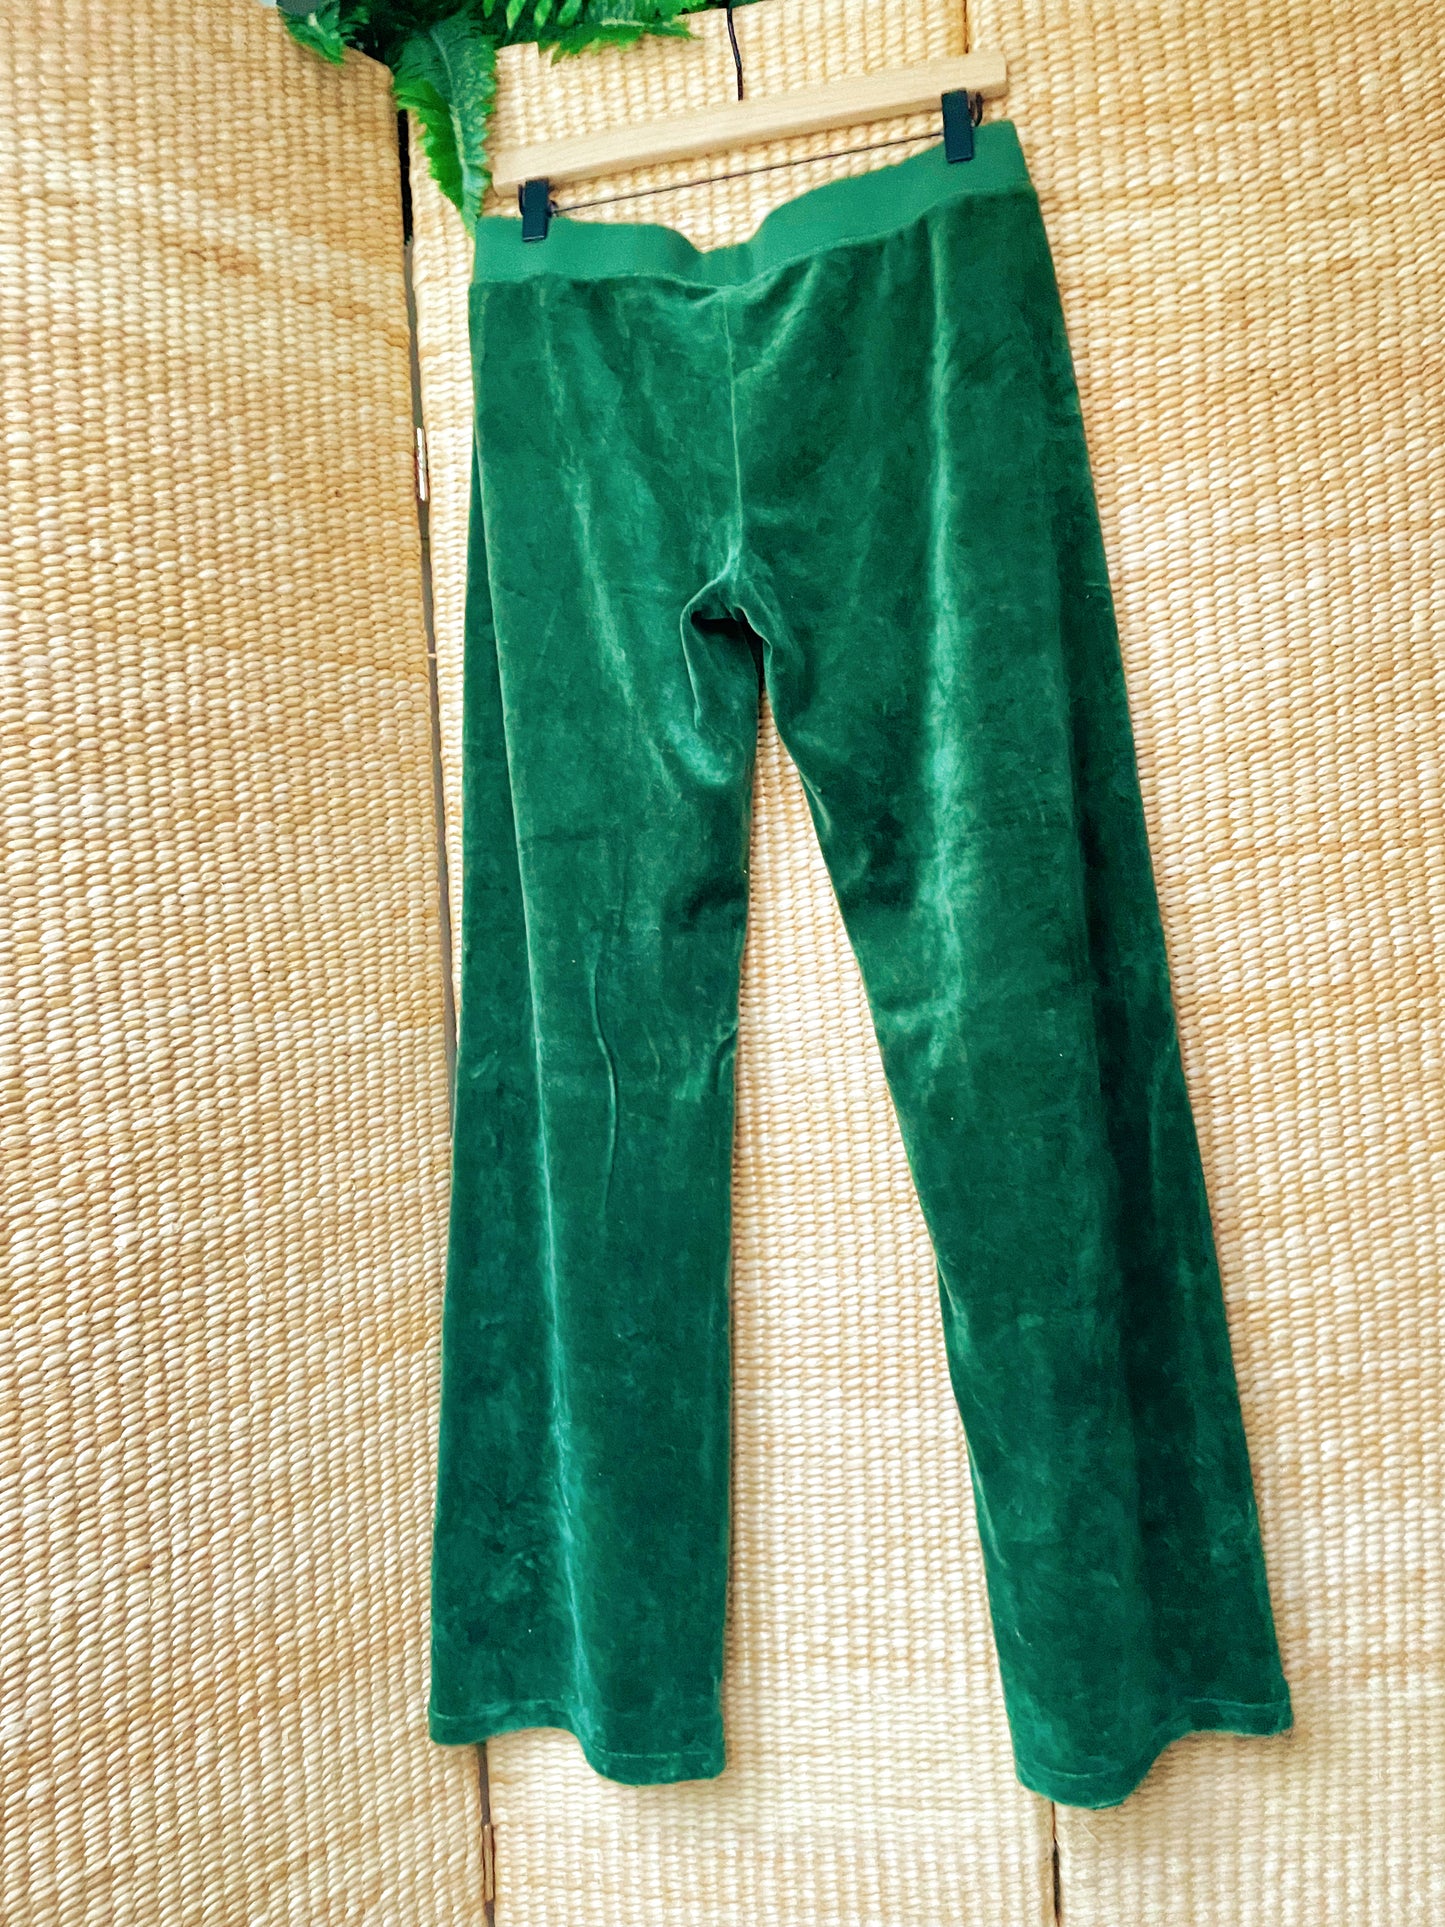 Rare 2000s Juicy Couture Velour Tracksuit